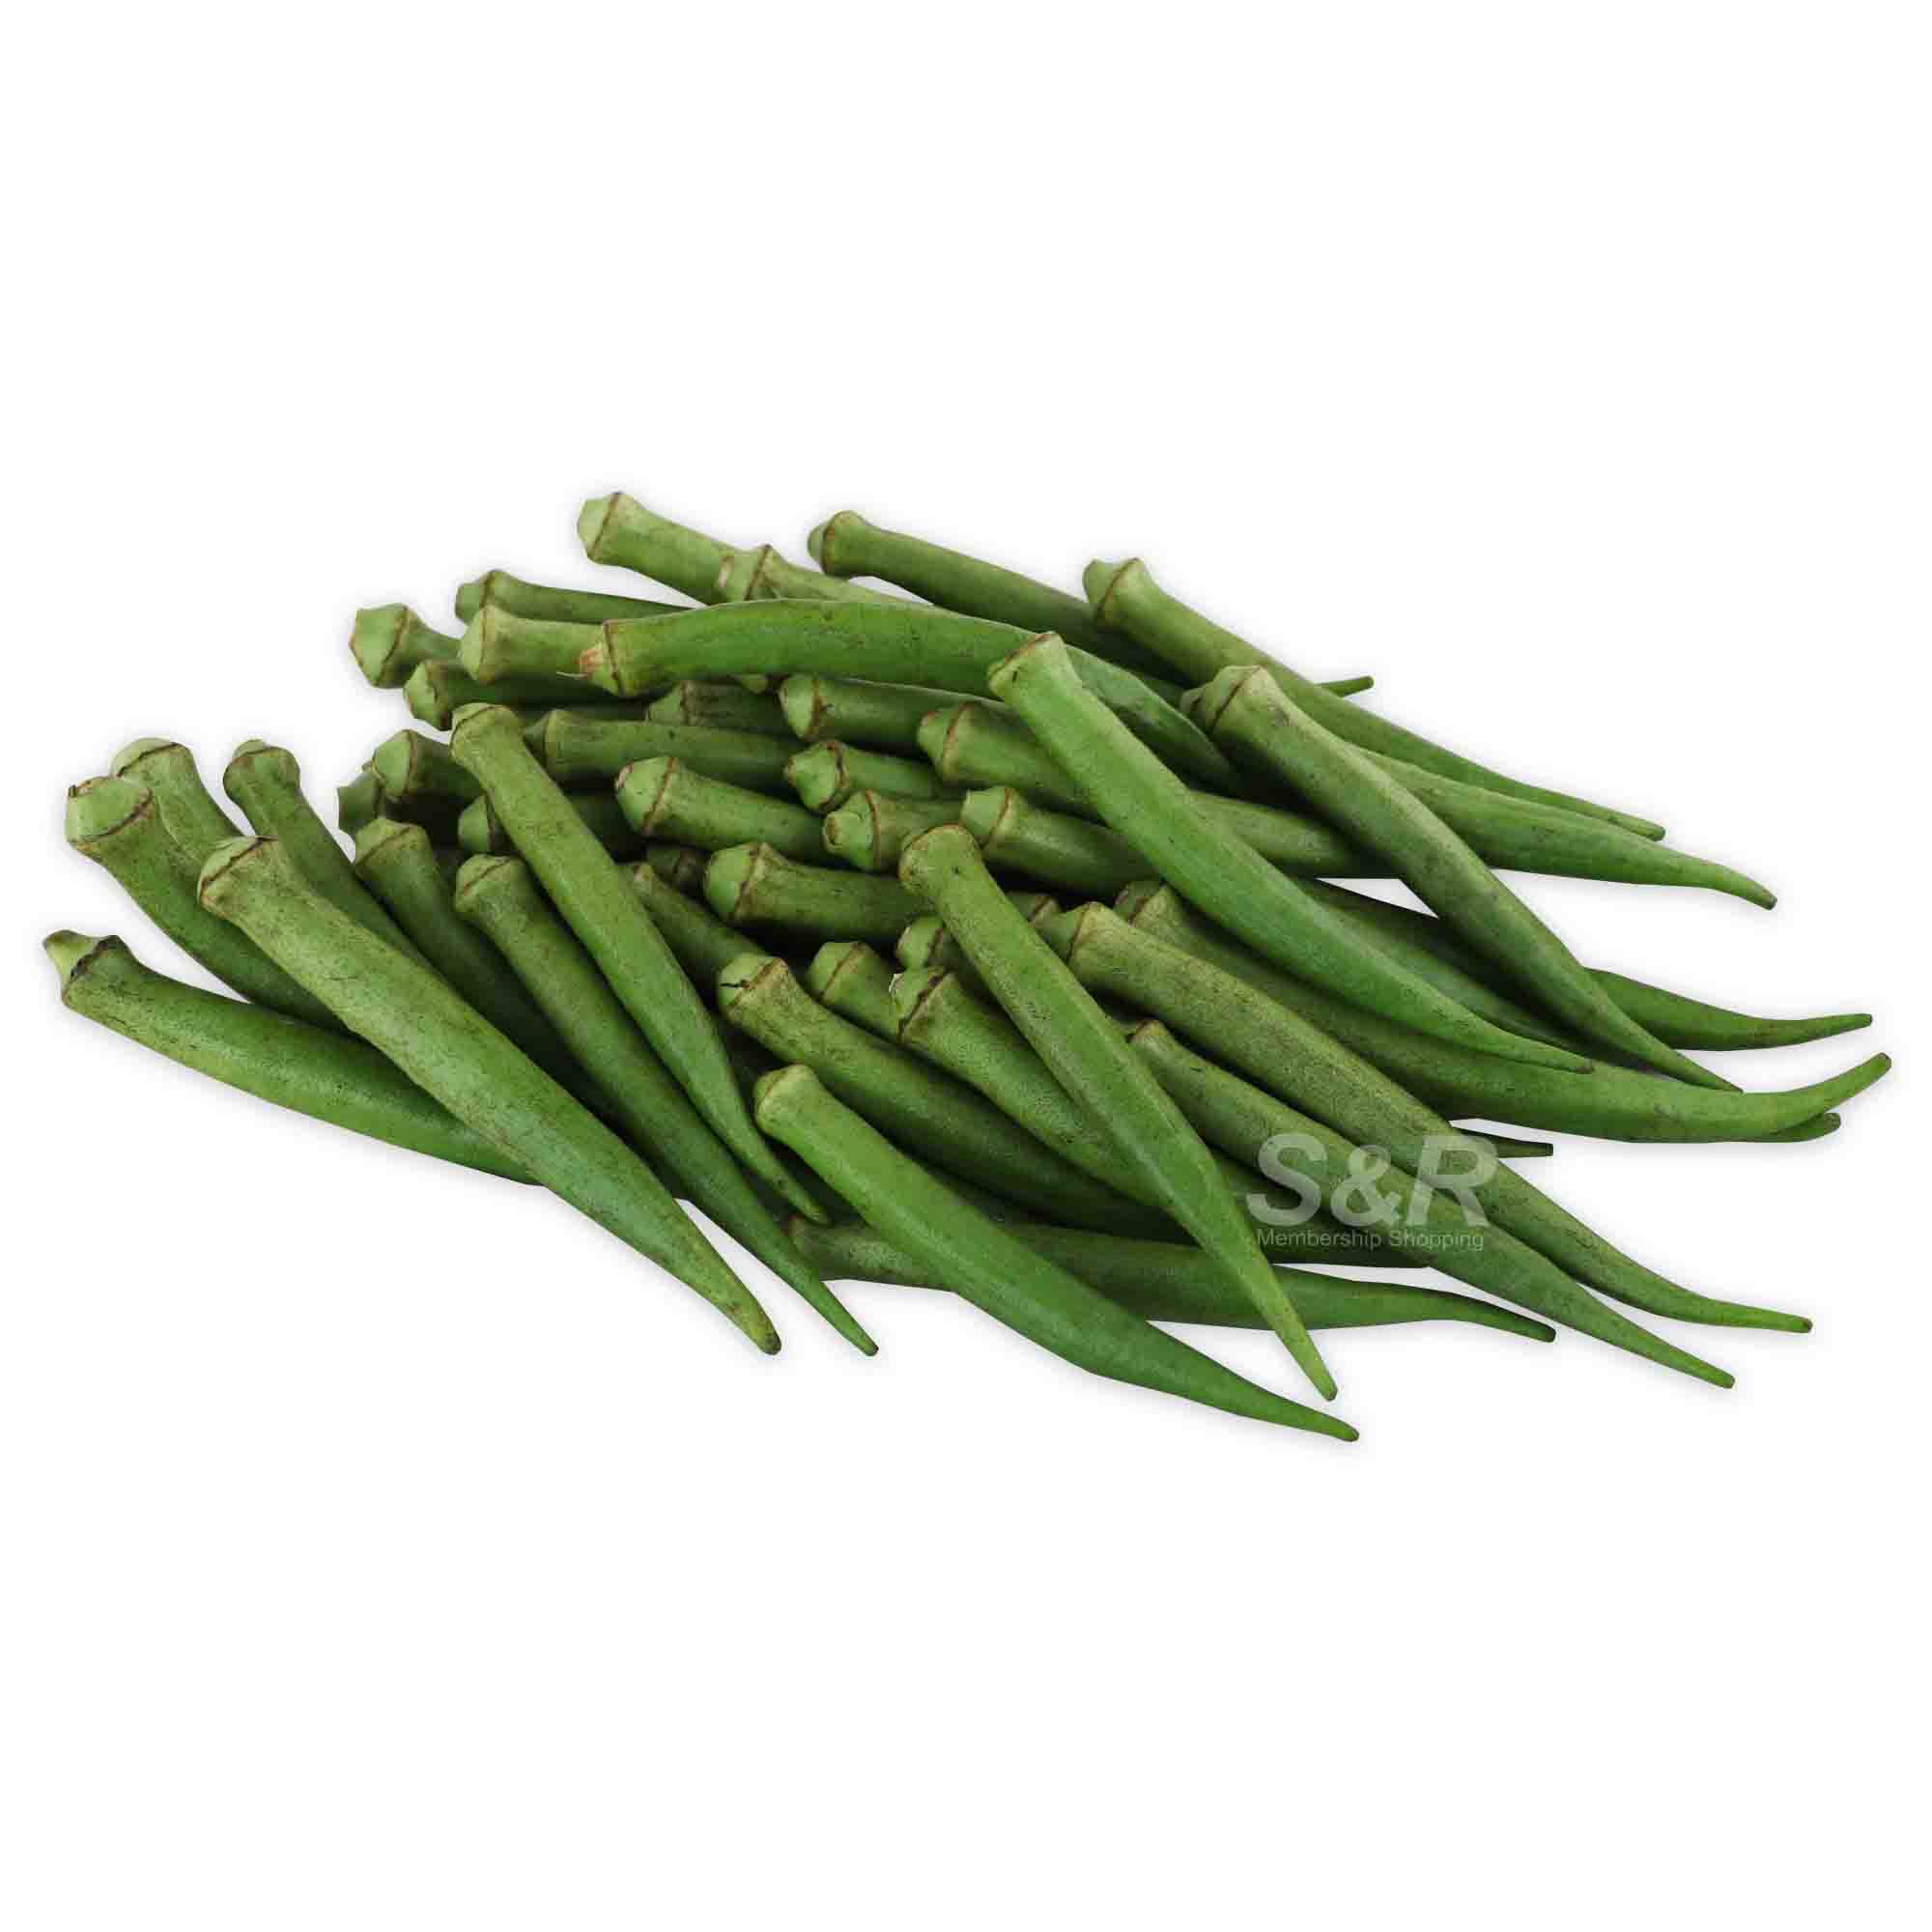 S&R Large Okra approx. 1kg